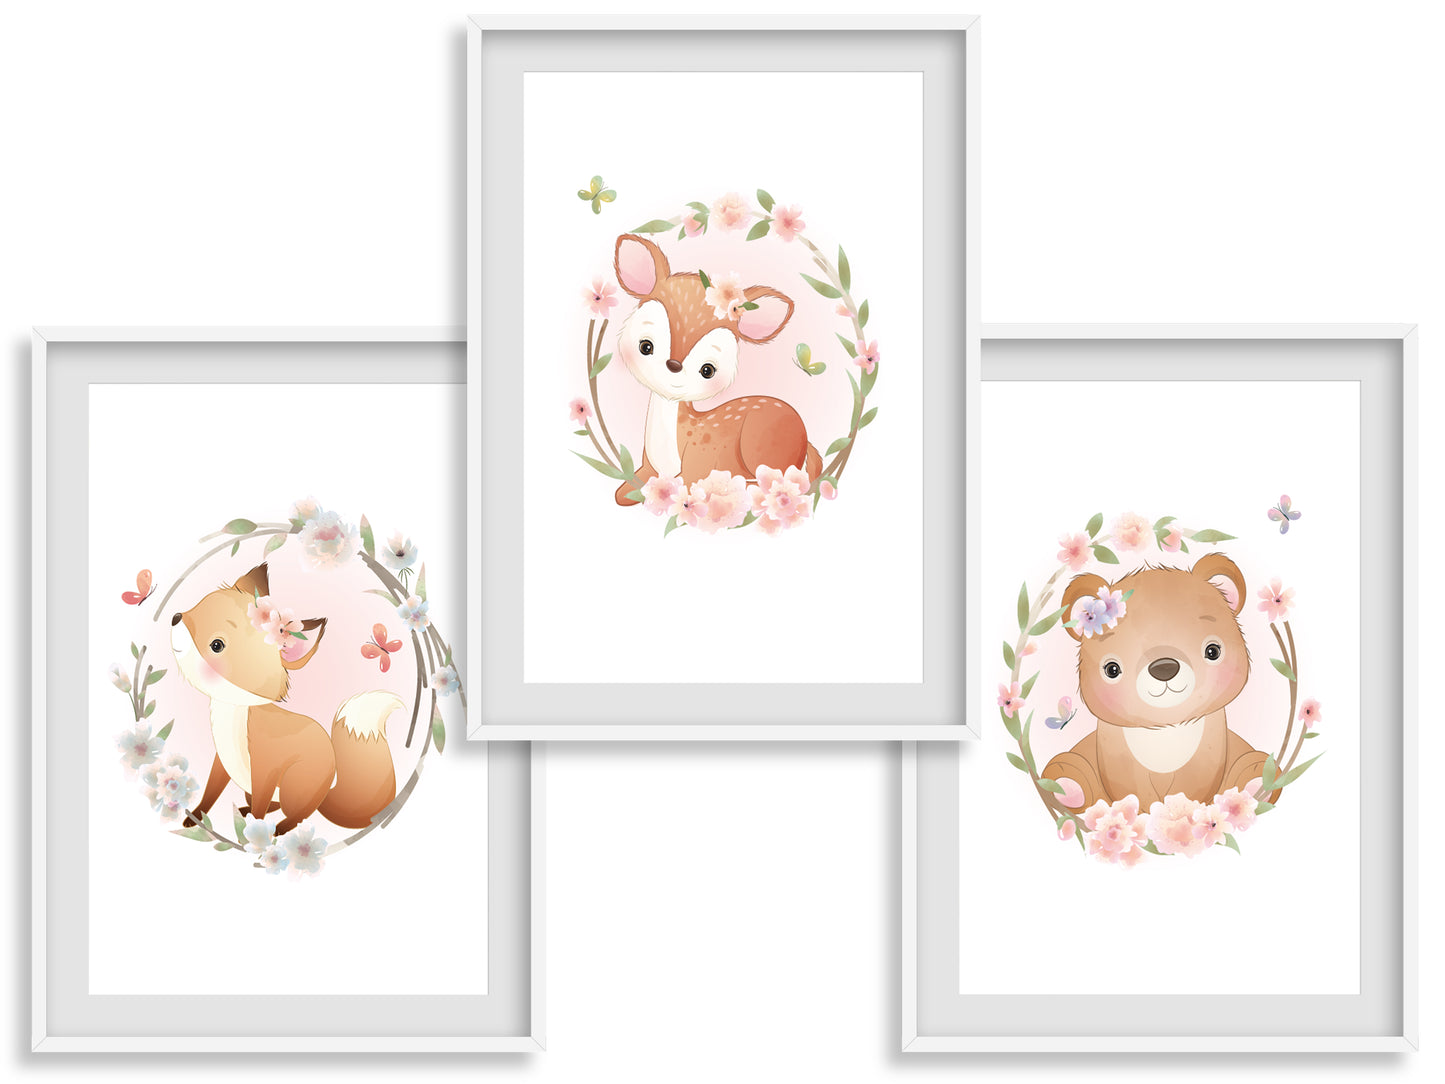 Posters doe cub and cute fox - A4 A3 - 3 posters baby child bedroom - Decoration - Quality printing - fawn - birth gift